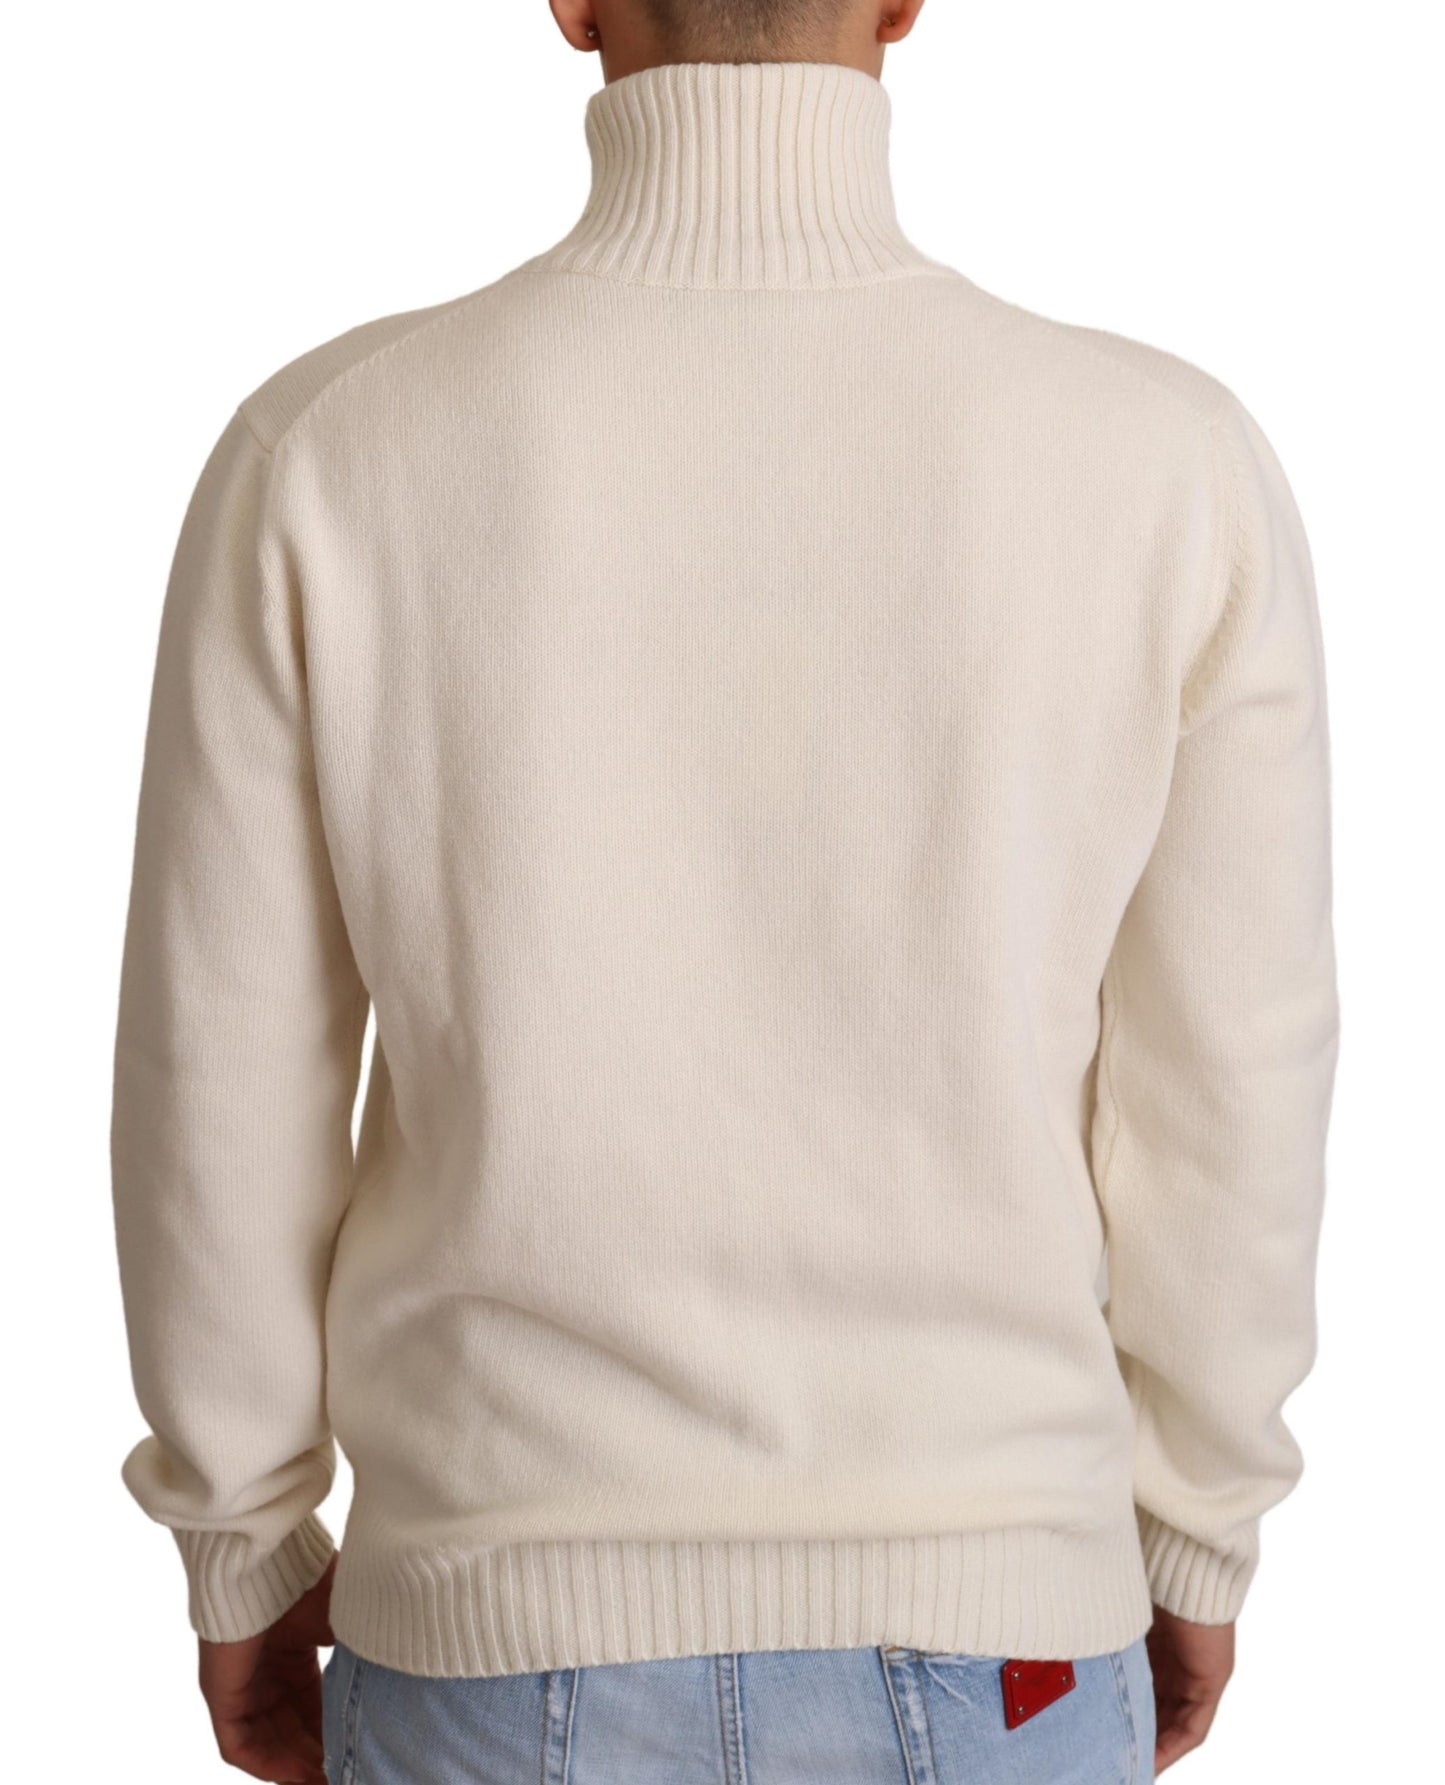 White Wool Turtleneck Pullover Sweater